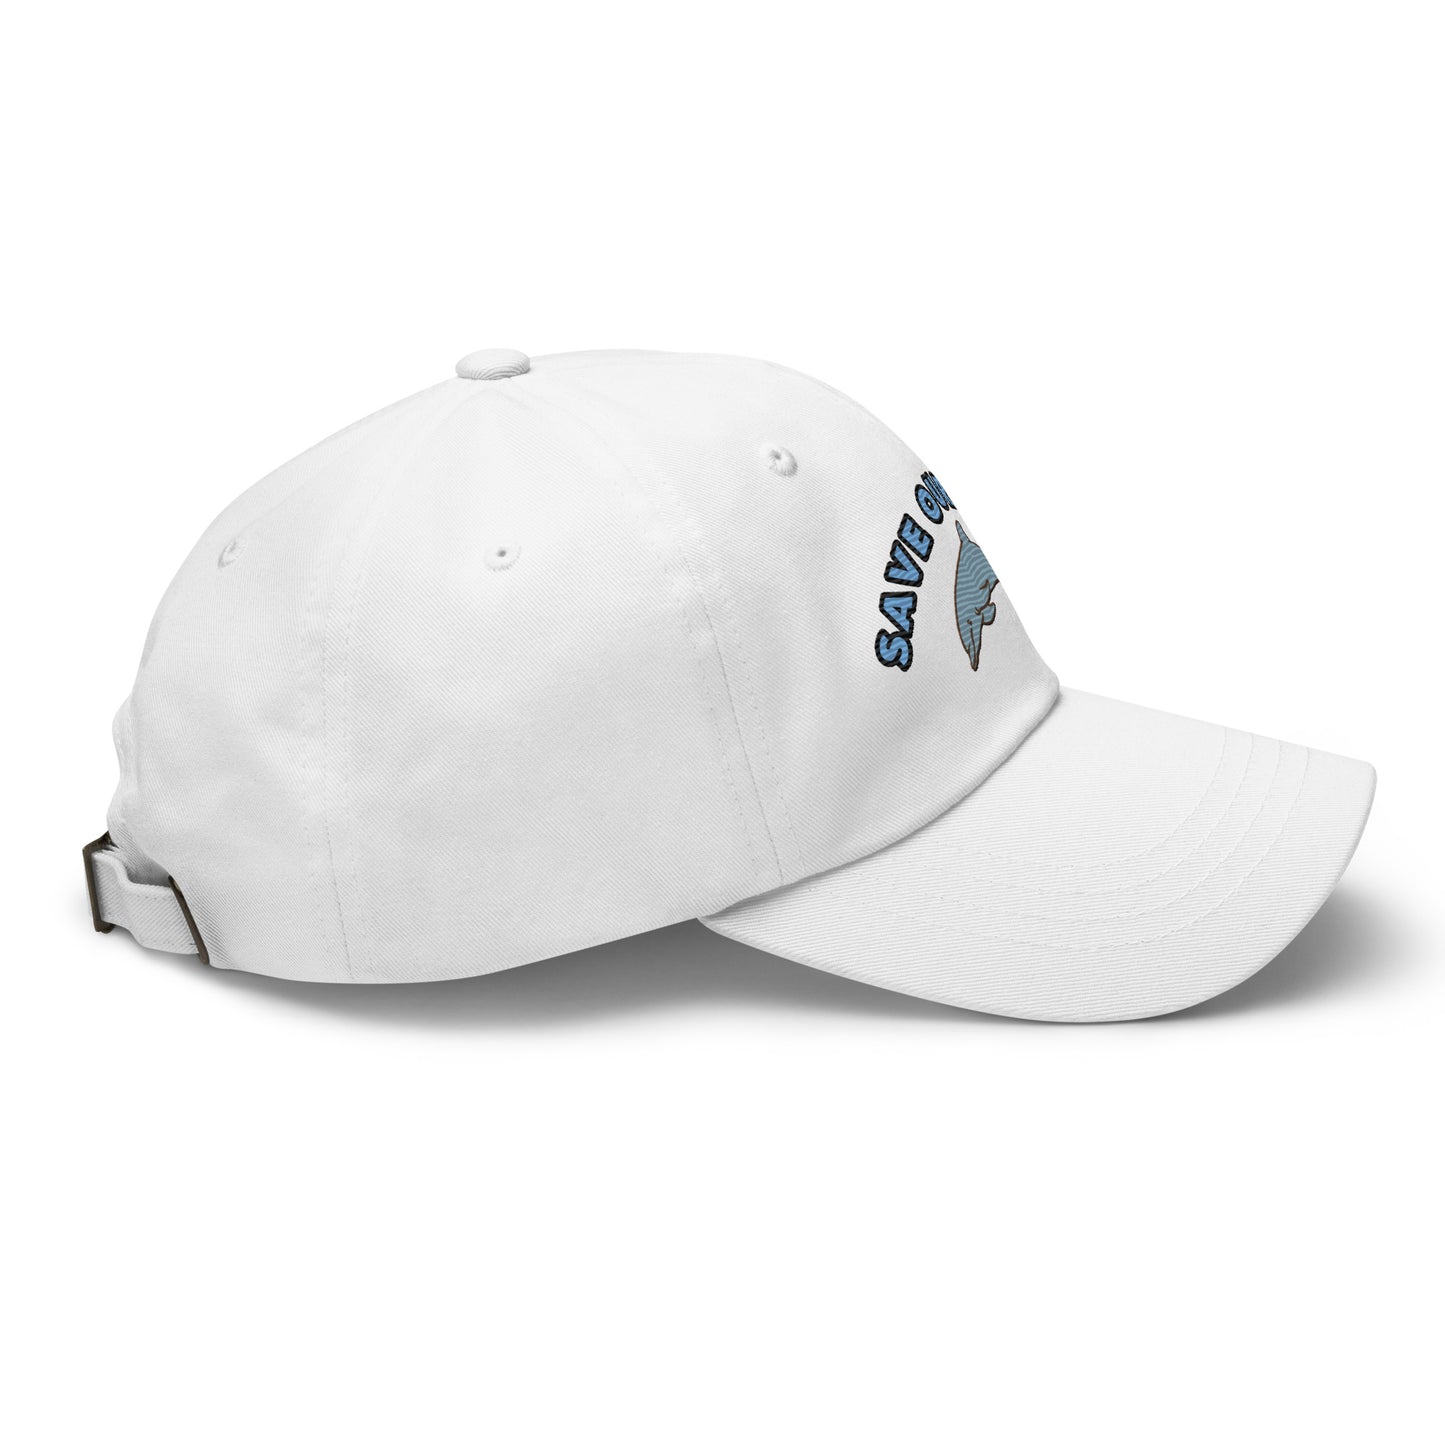 Save Our Seas Dolphin Dad hat: Pulls 4 pounds of ocean plastic!